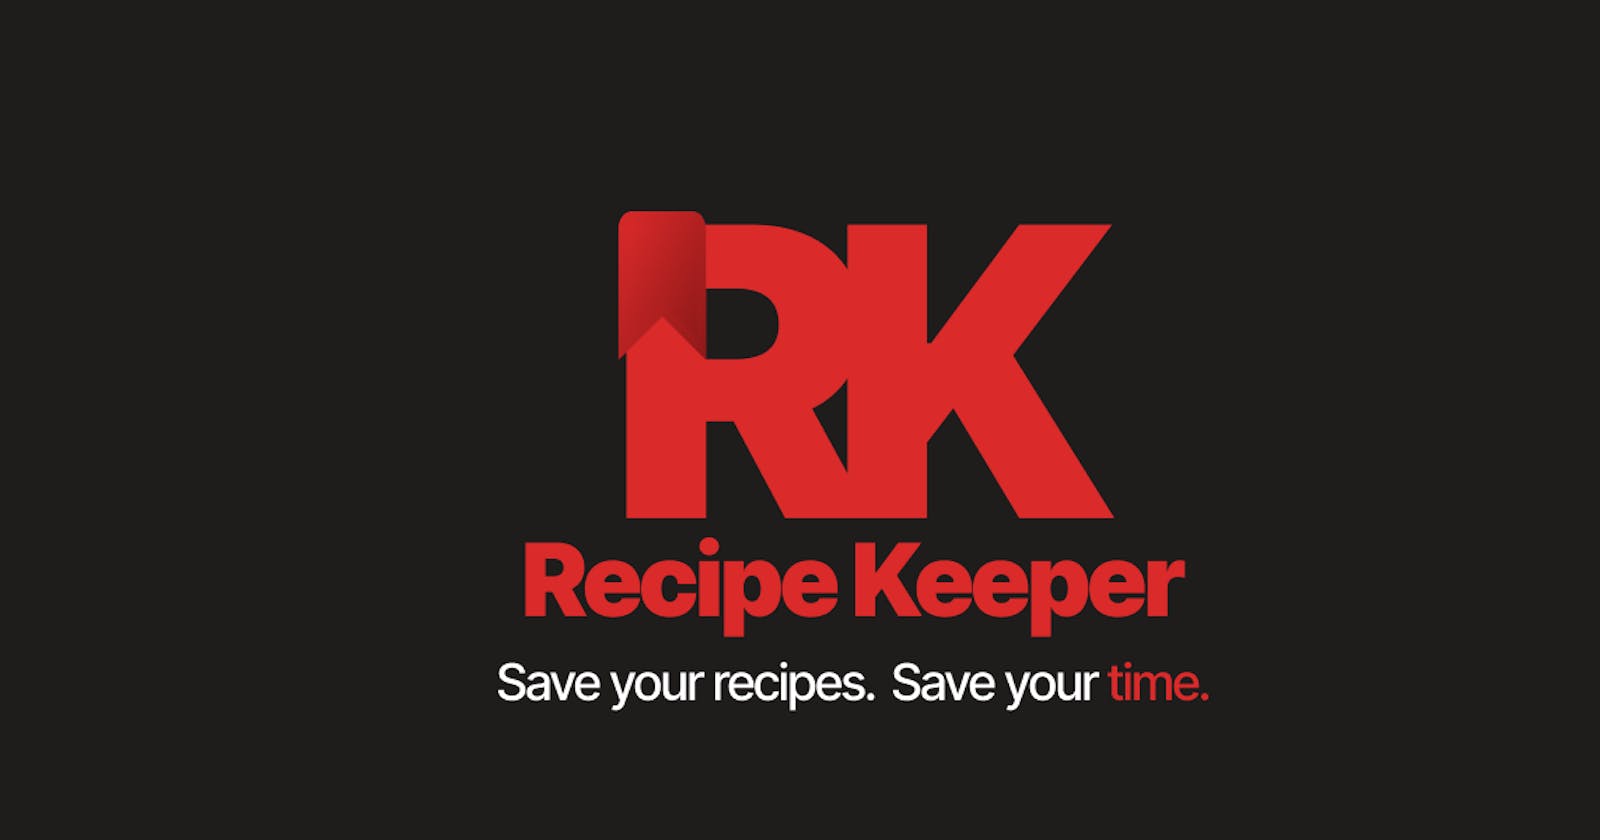 Presenting Recipe Keeper - the easiest way to store and find recipes on the internet